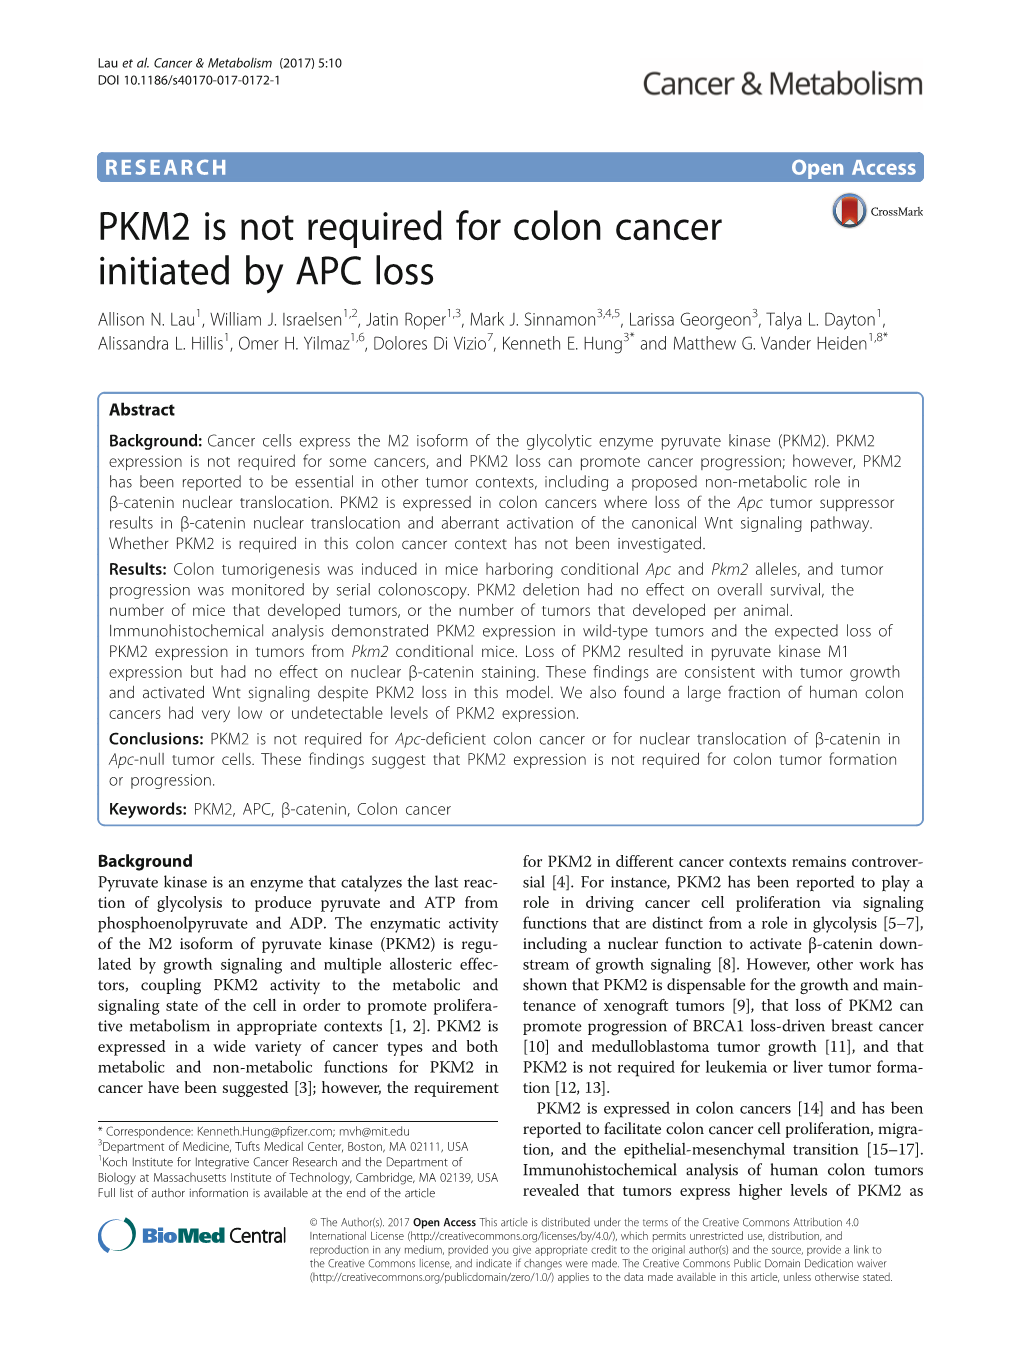 PKM2 Is Not Required for Colon Cancer Initiated by APC Loss Allison N